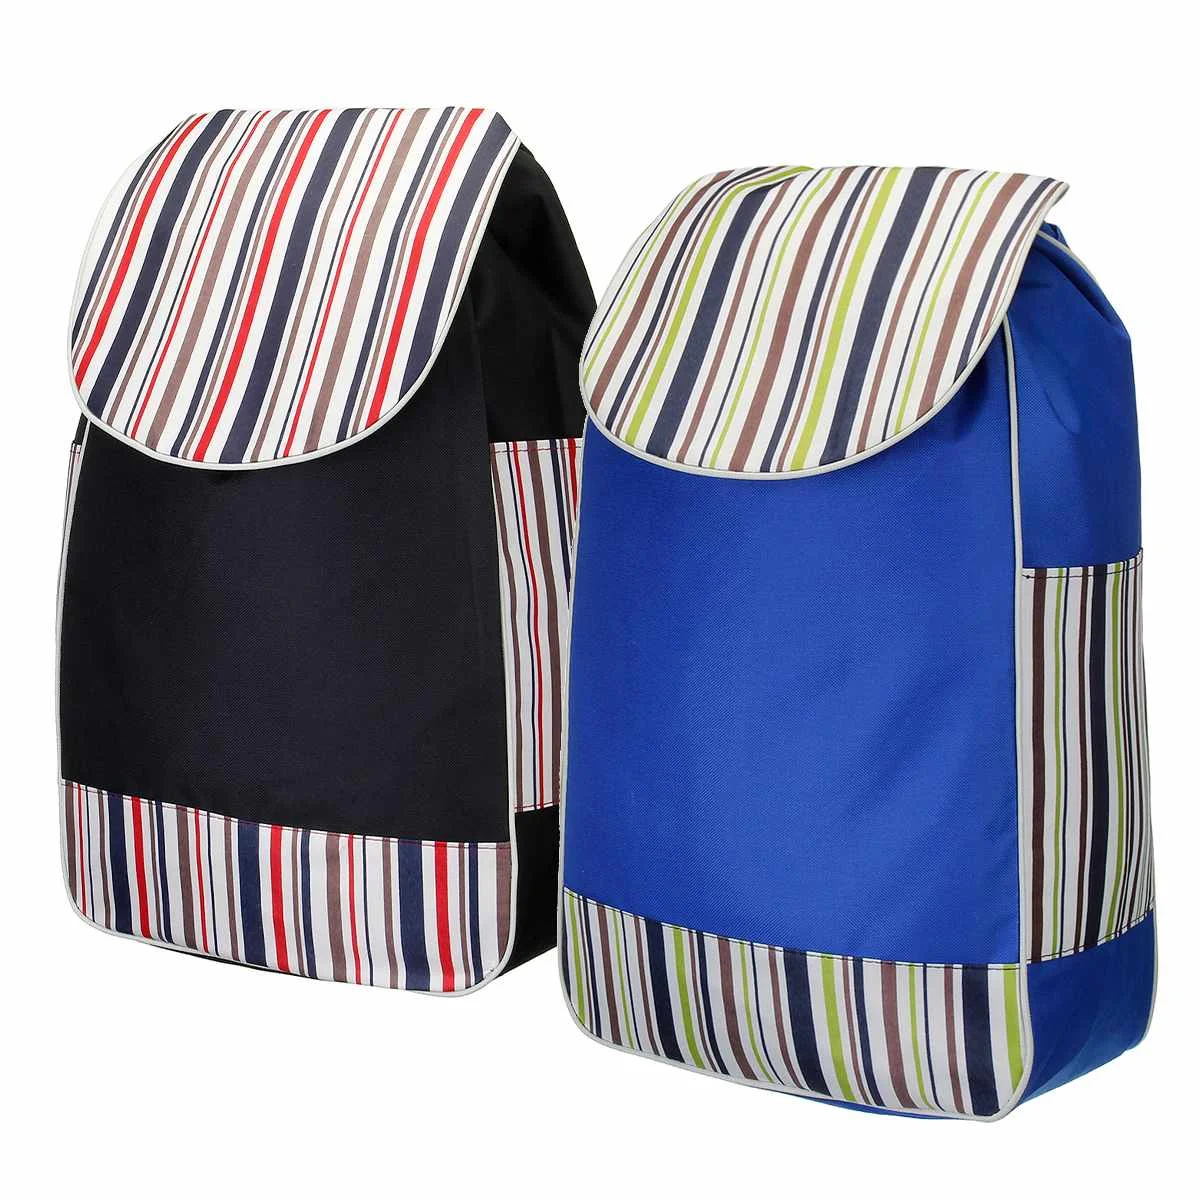 Details about   Foldable Shopping Trolley Bag Tote Cart Carts Trolley Bag Basket Luggage Rain Pr